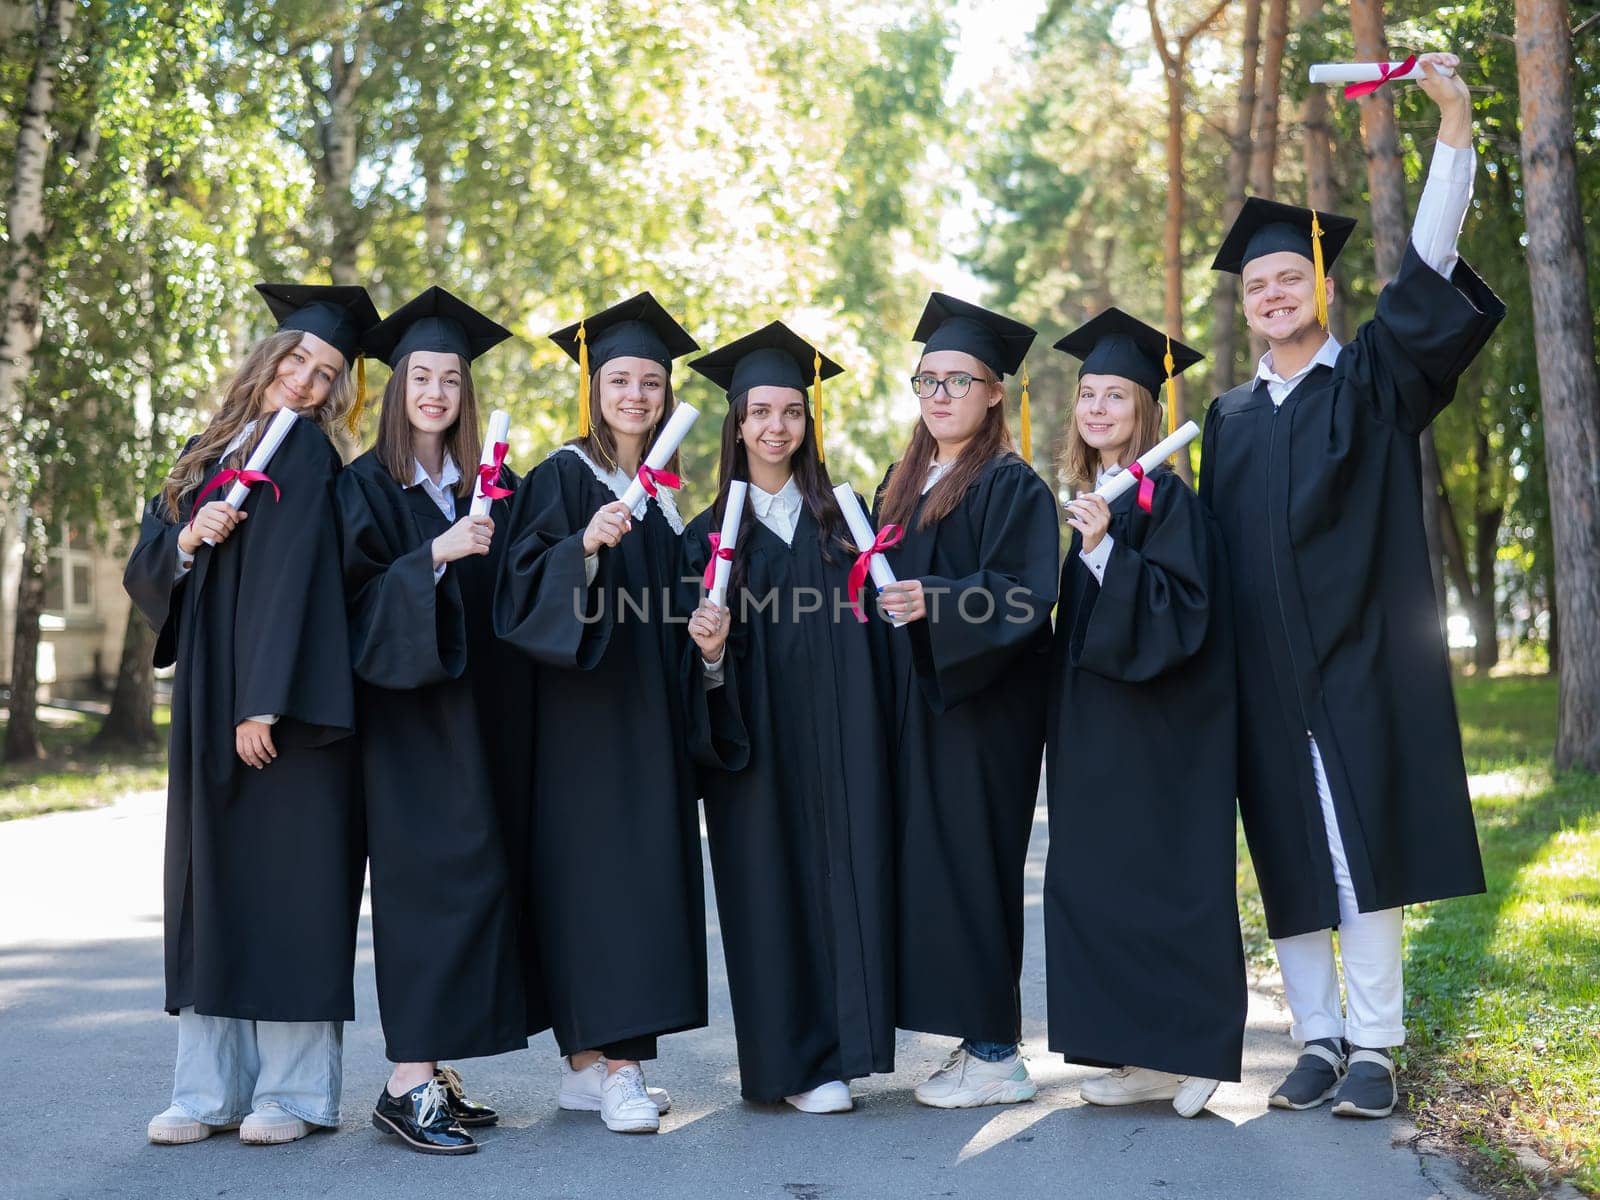 Row of young students in graduation gowns outdoors showing off their diplomas